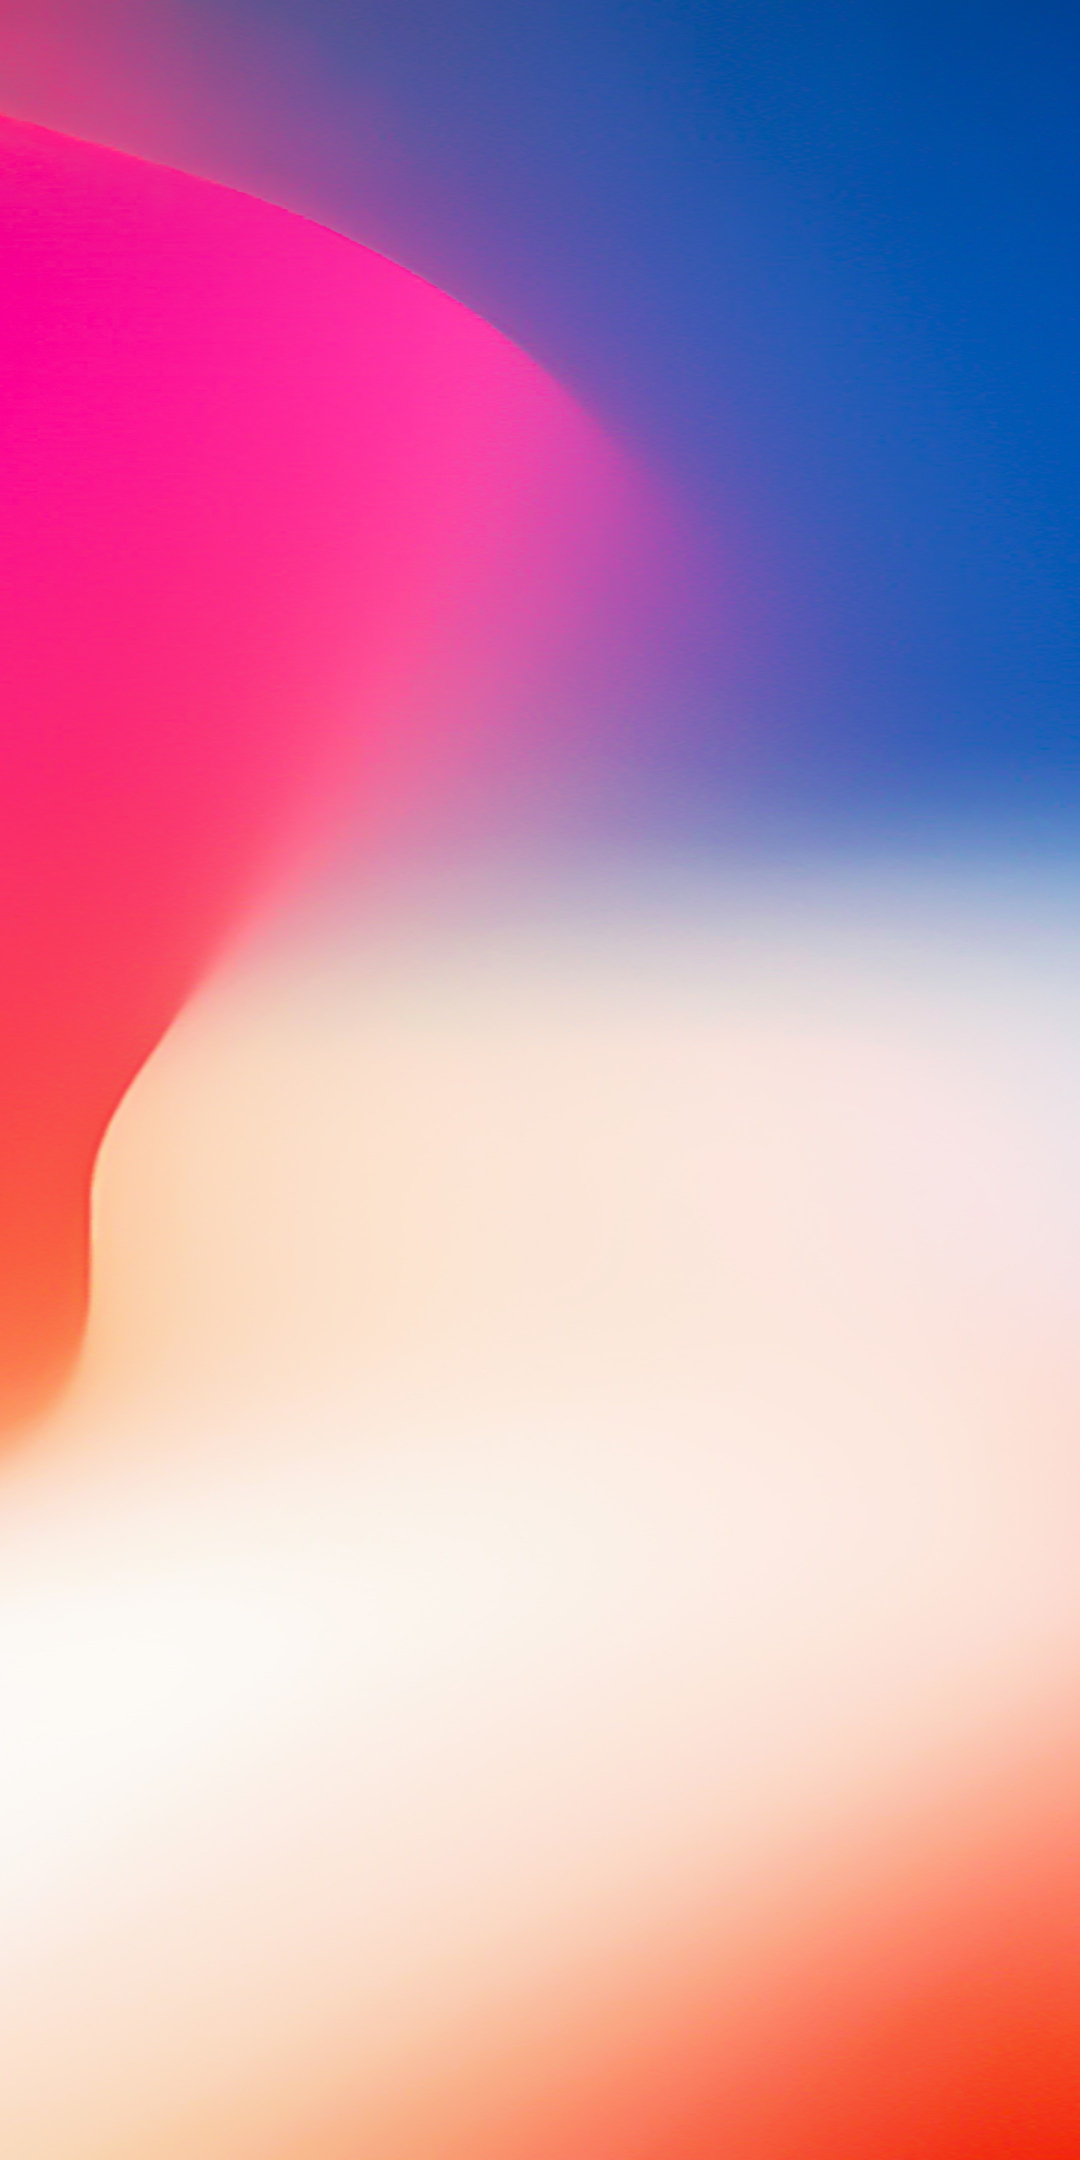 Iphone x, stock, colorful gradient, abstract, 1080x2160 wallpaper